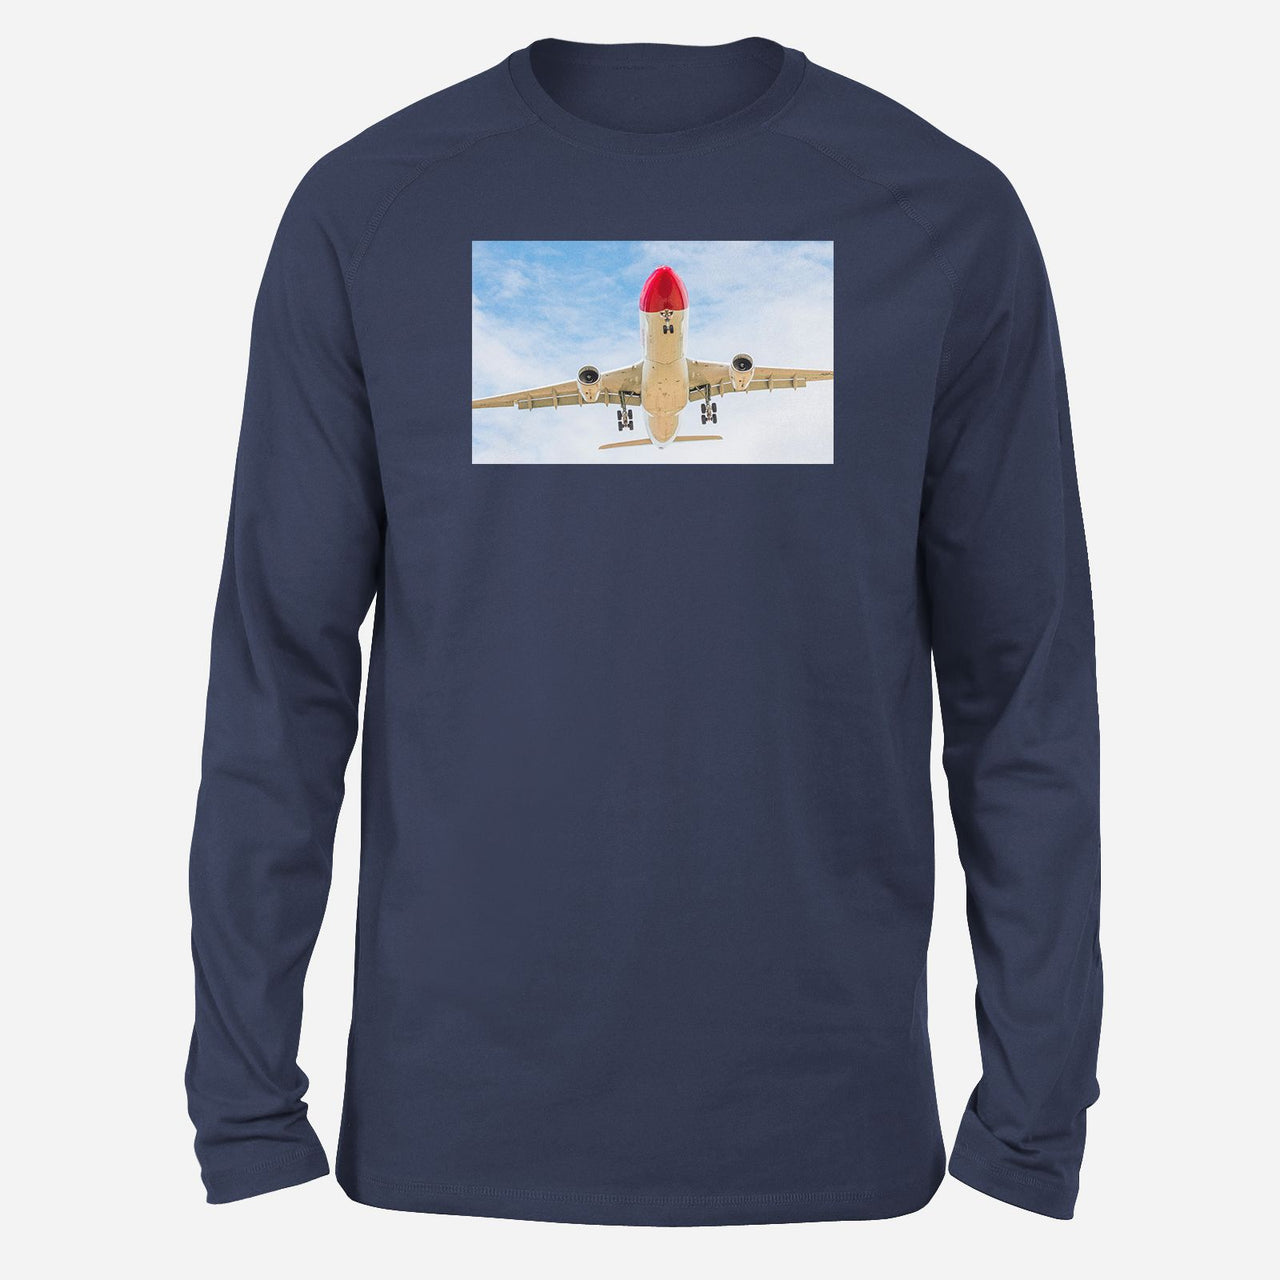 Beautiful Airbus A330 on Approach Designed Long-Sleeve T-Shirts